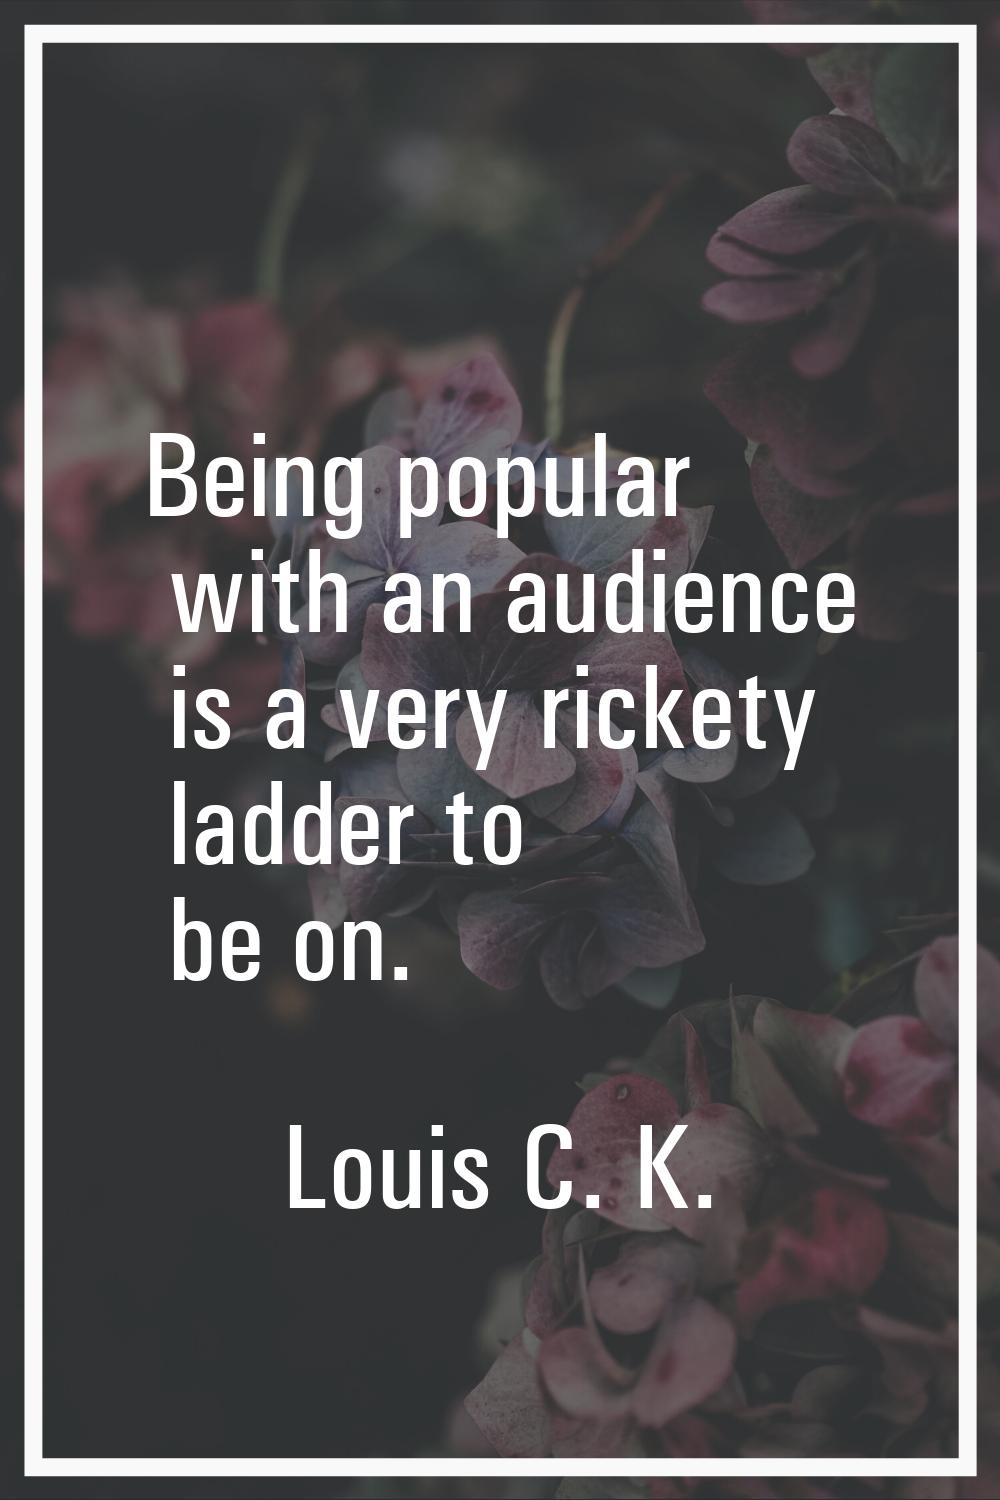 Being popular with an audience is a very rickety ladder to be on.